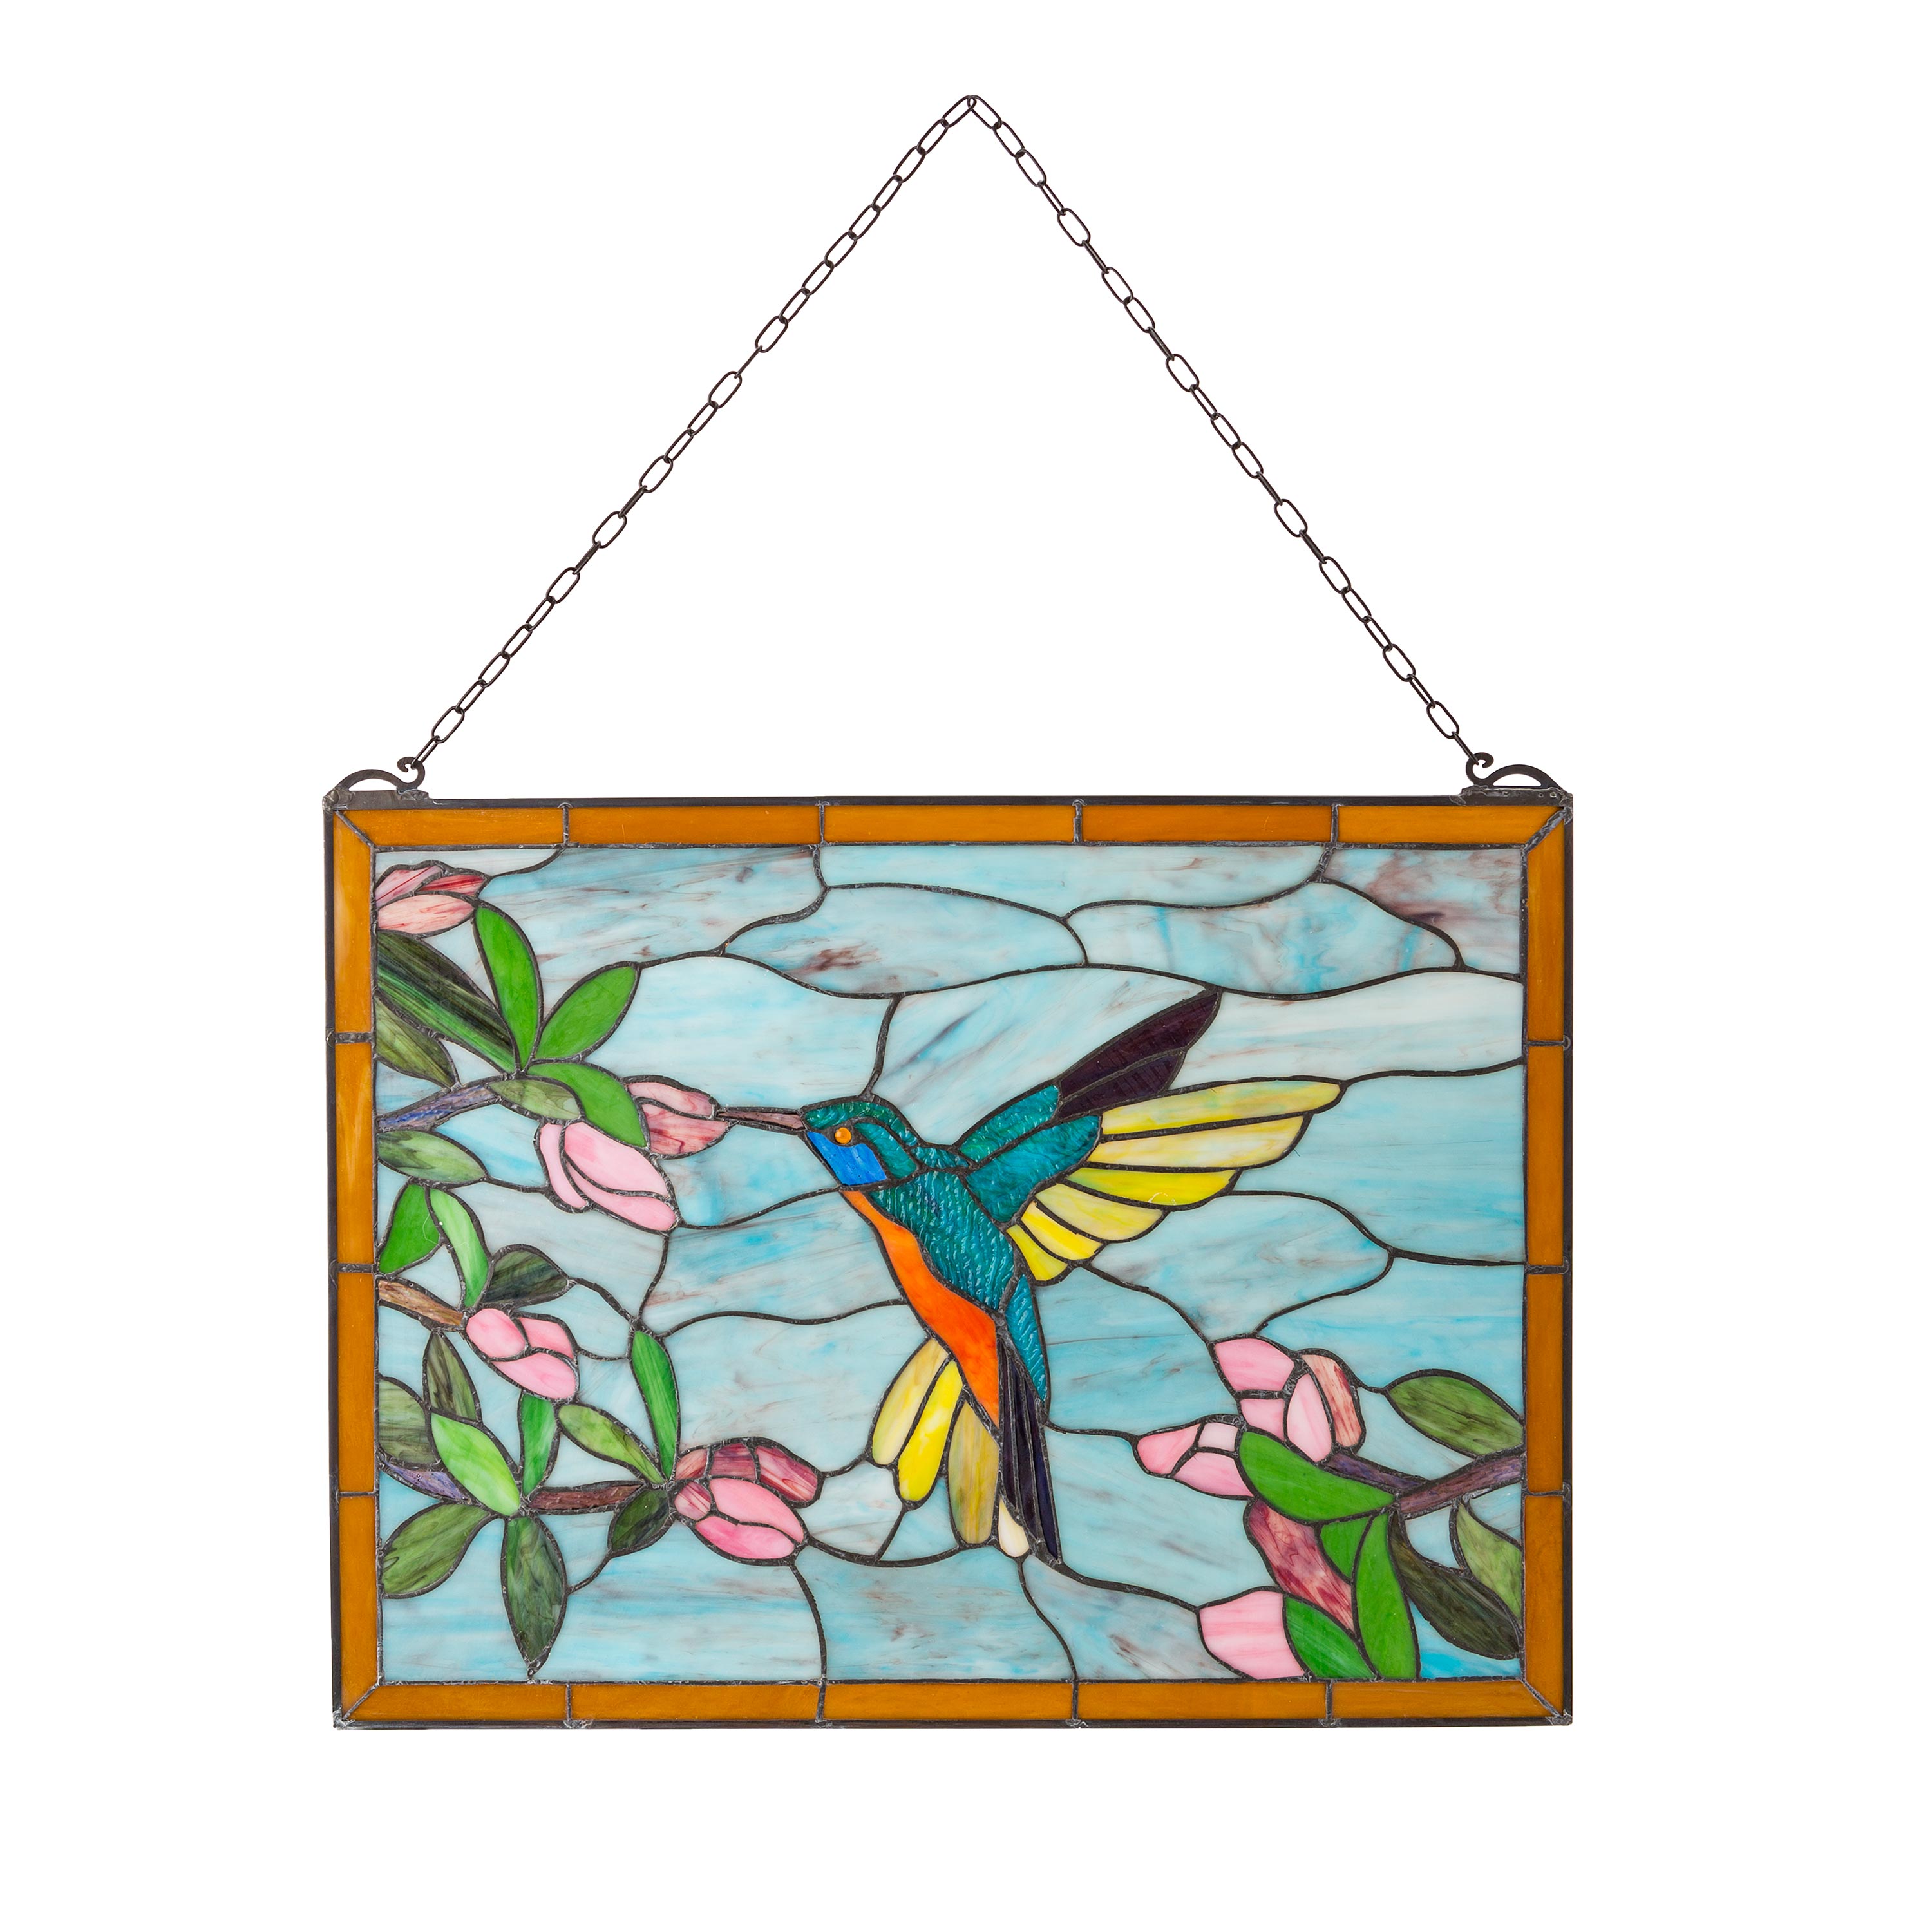 Stained Glass Hummingbird Window Panel with Metal Frame and Chain